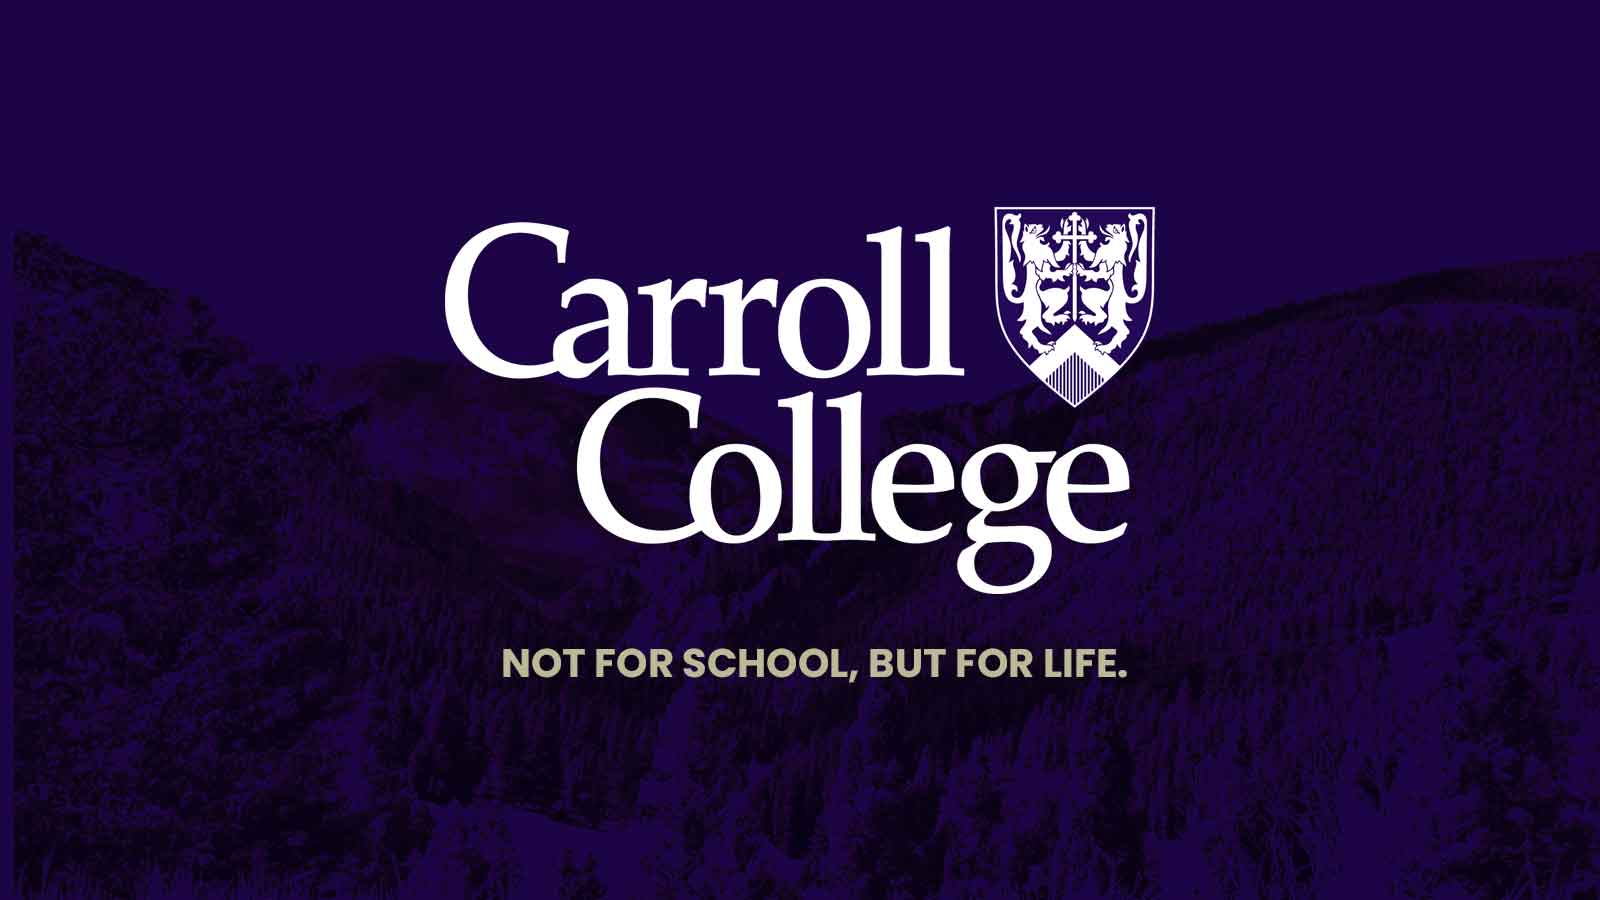 Carroll College Earns Top Rankings from U.S. News & World Report